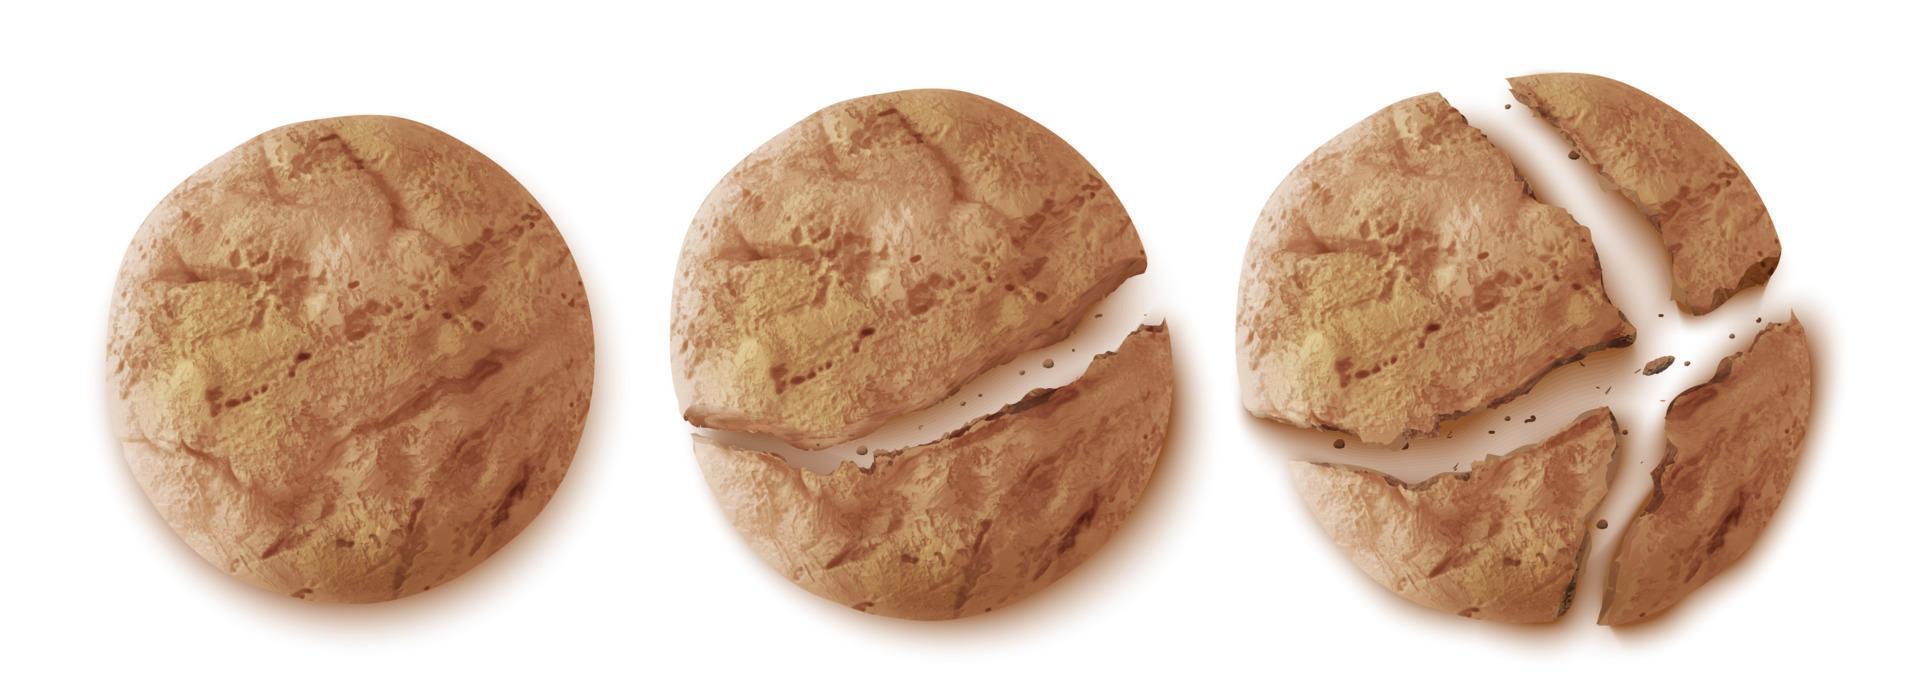 Oatmeal cookies top view, whole or cracked biscuit vector